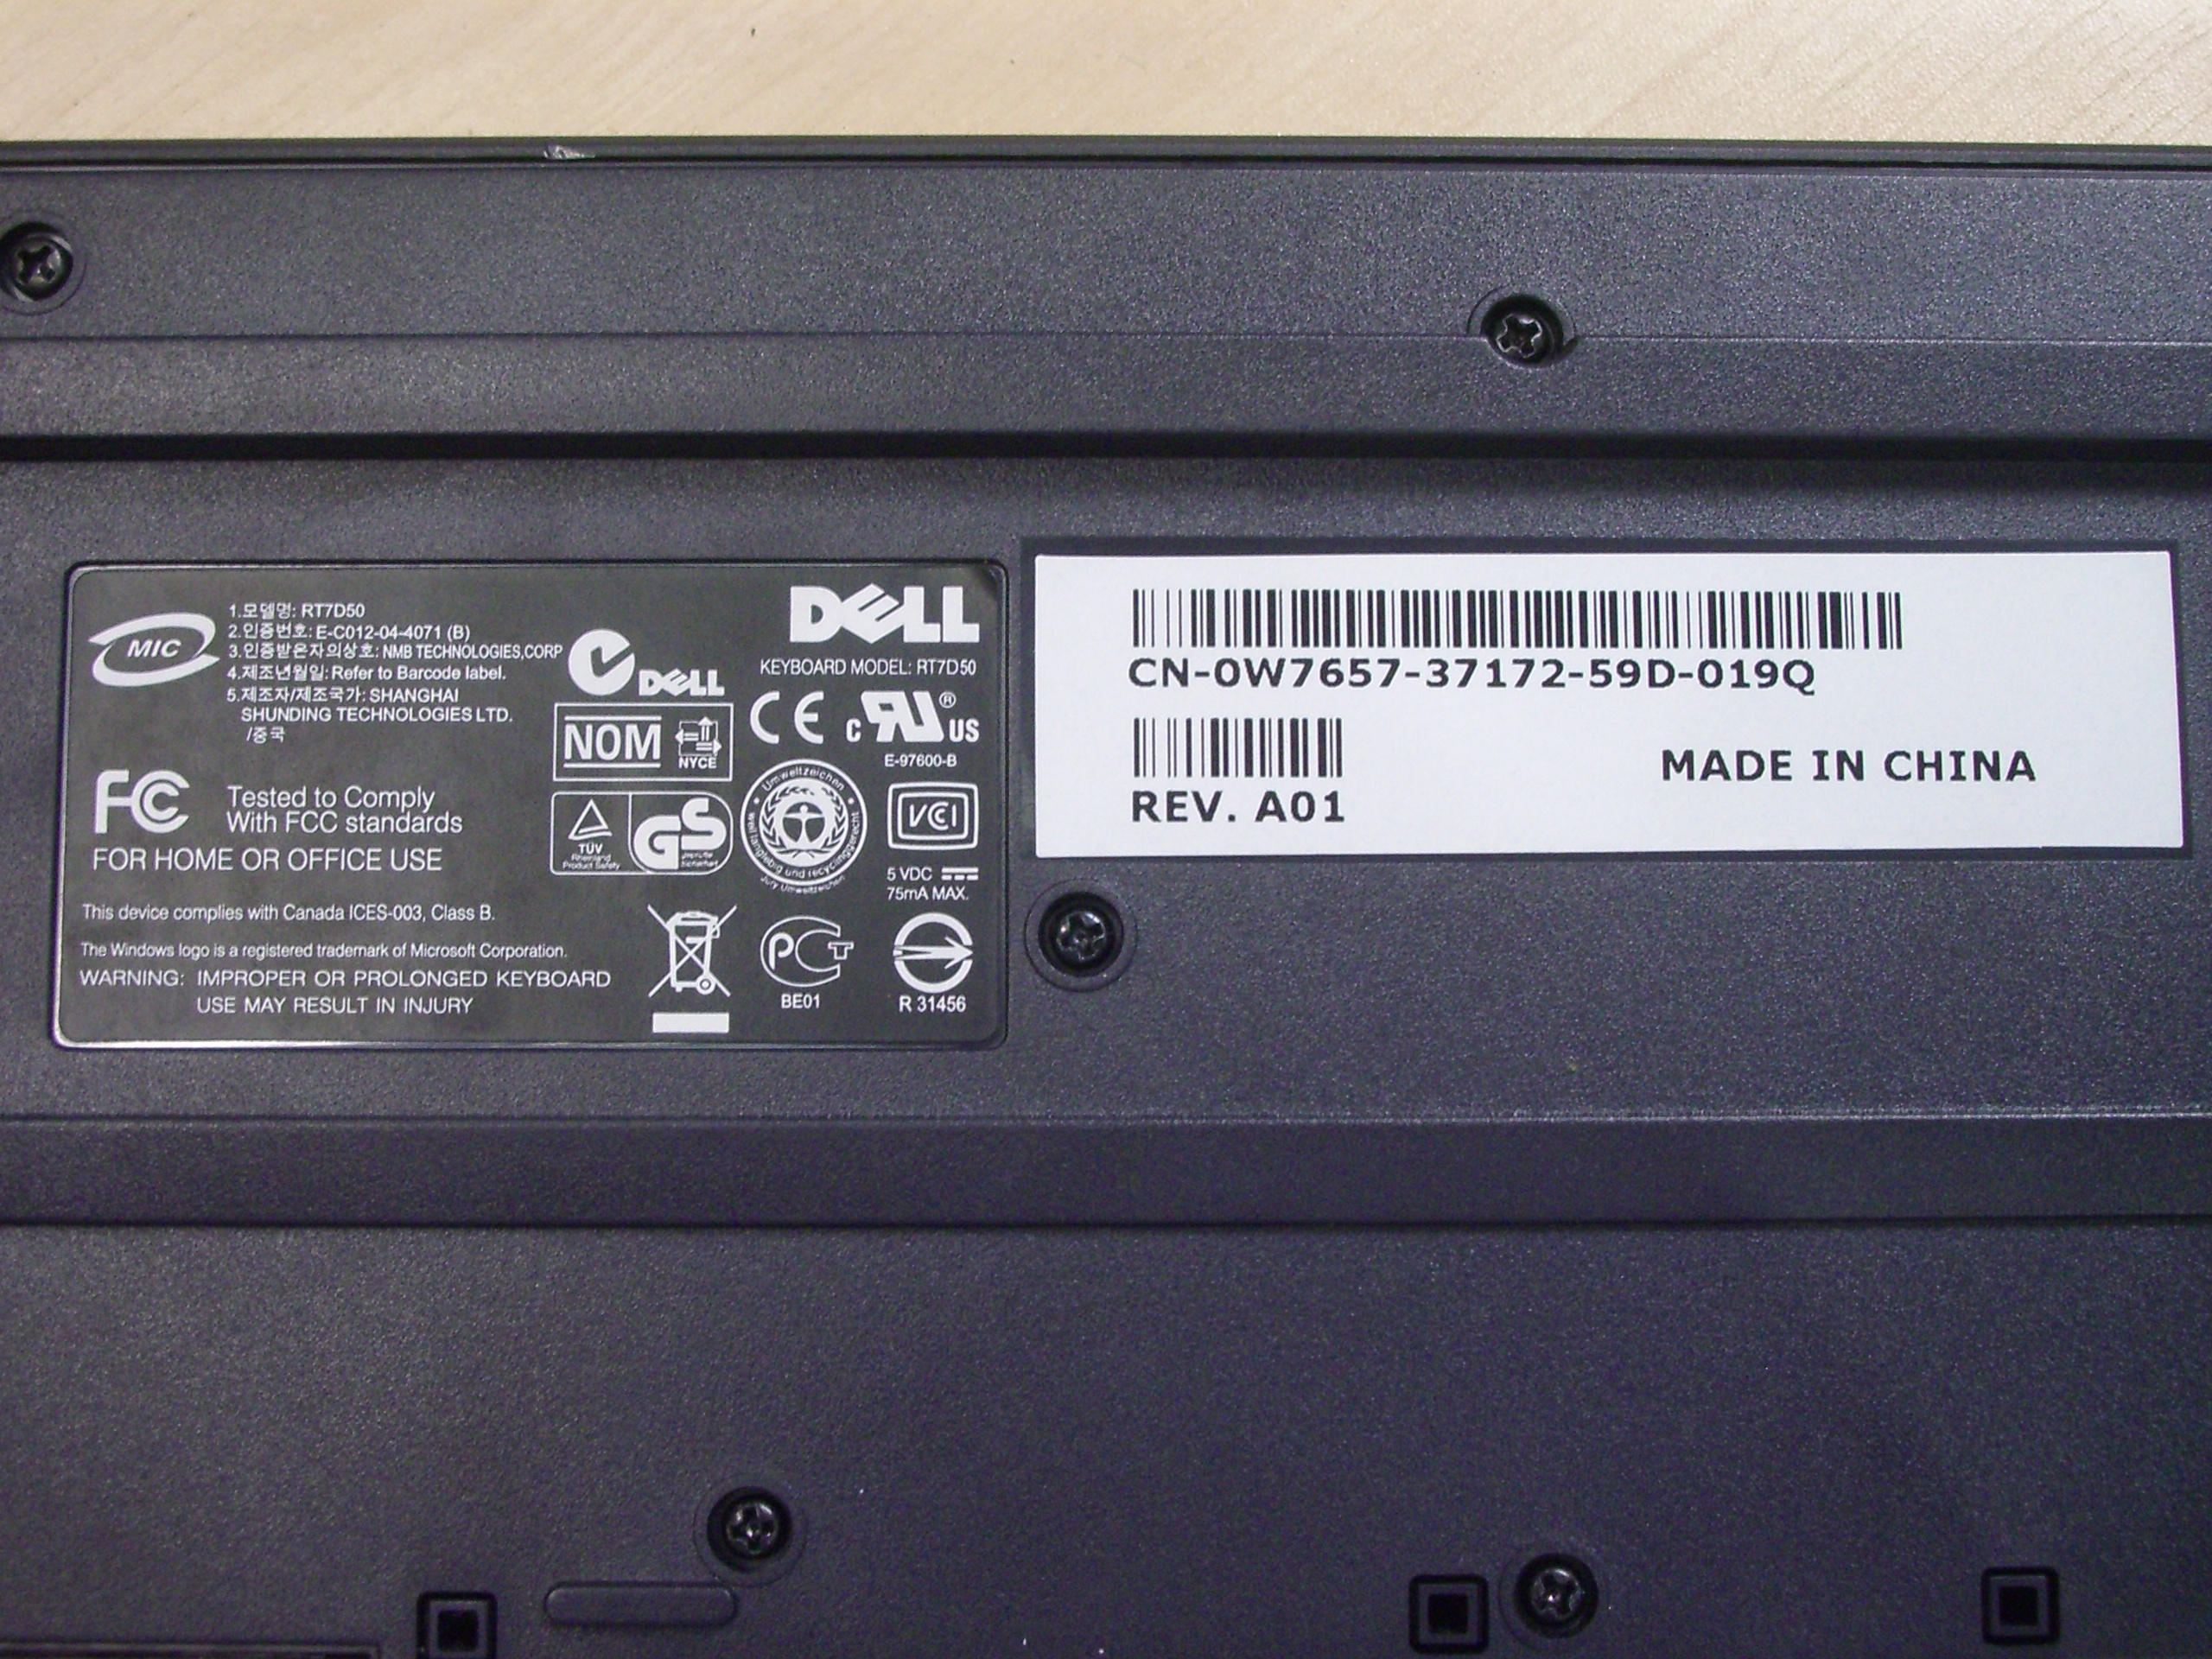 dell laptop serial number format